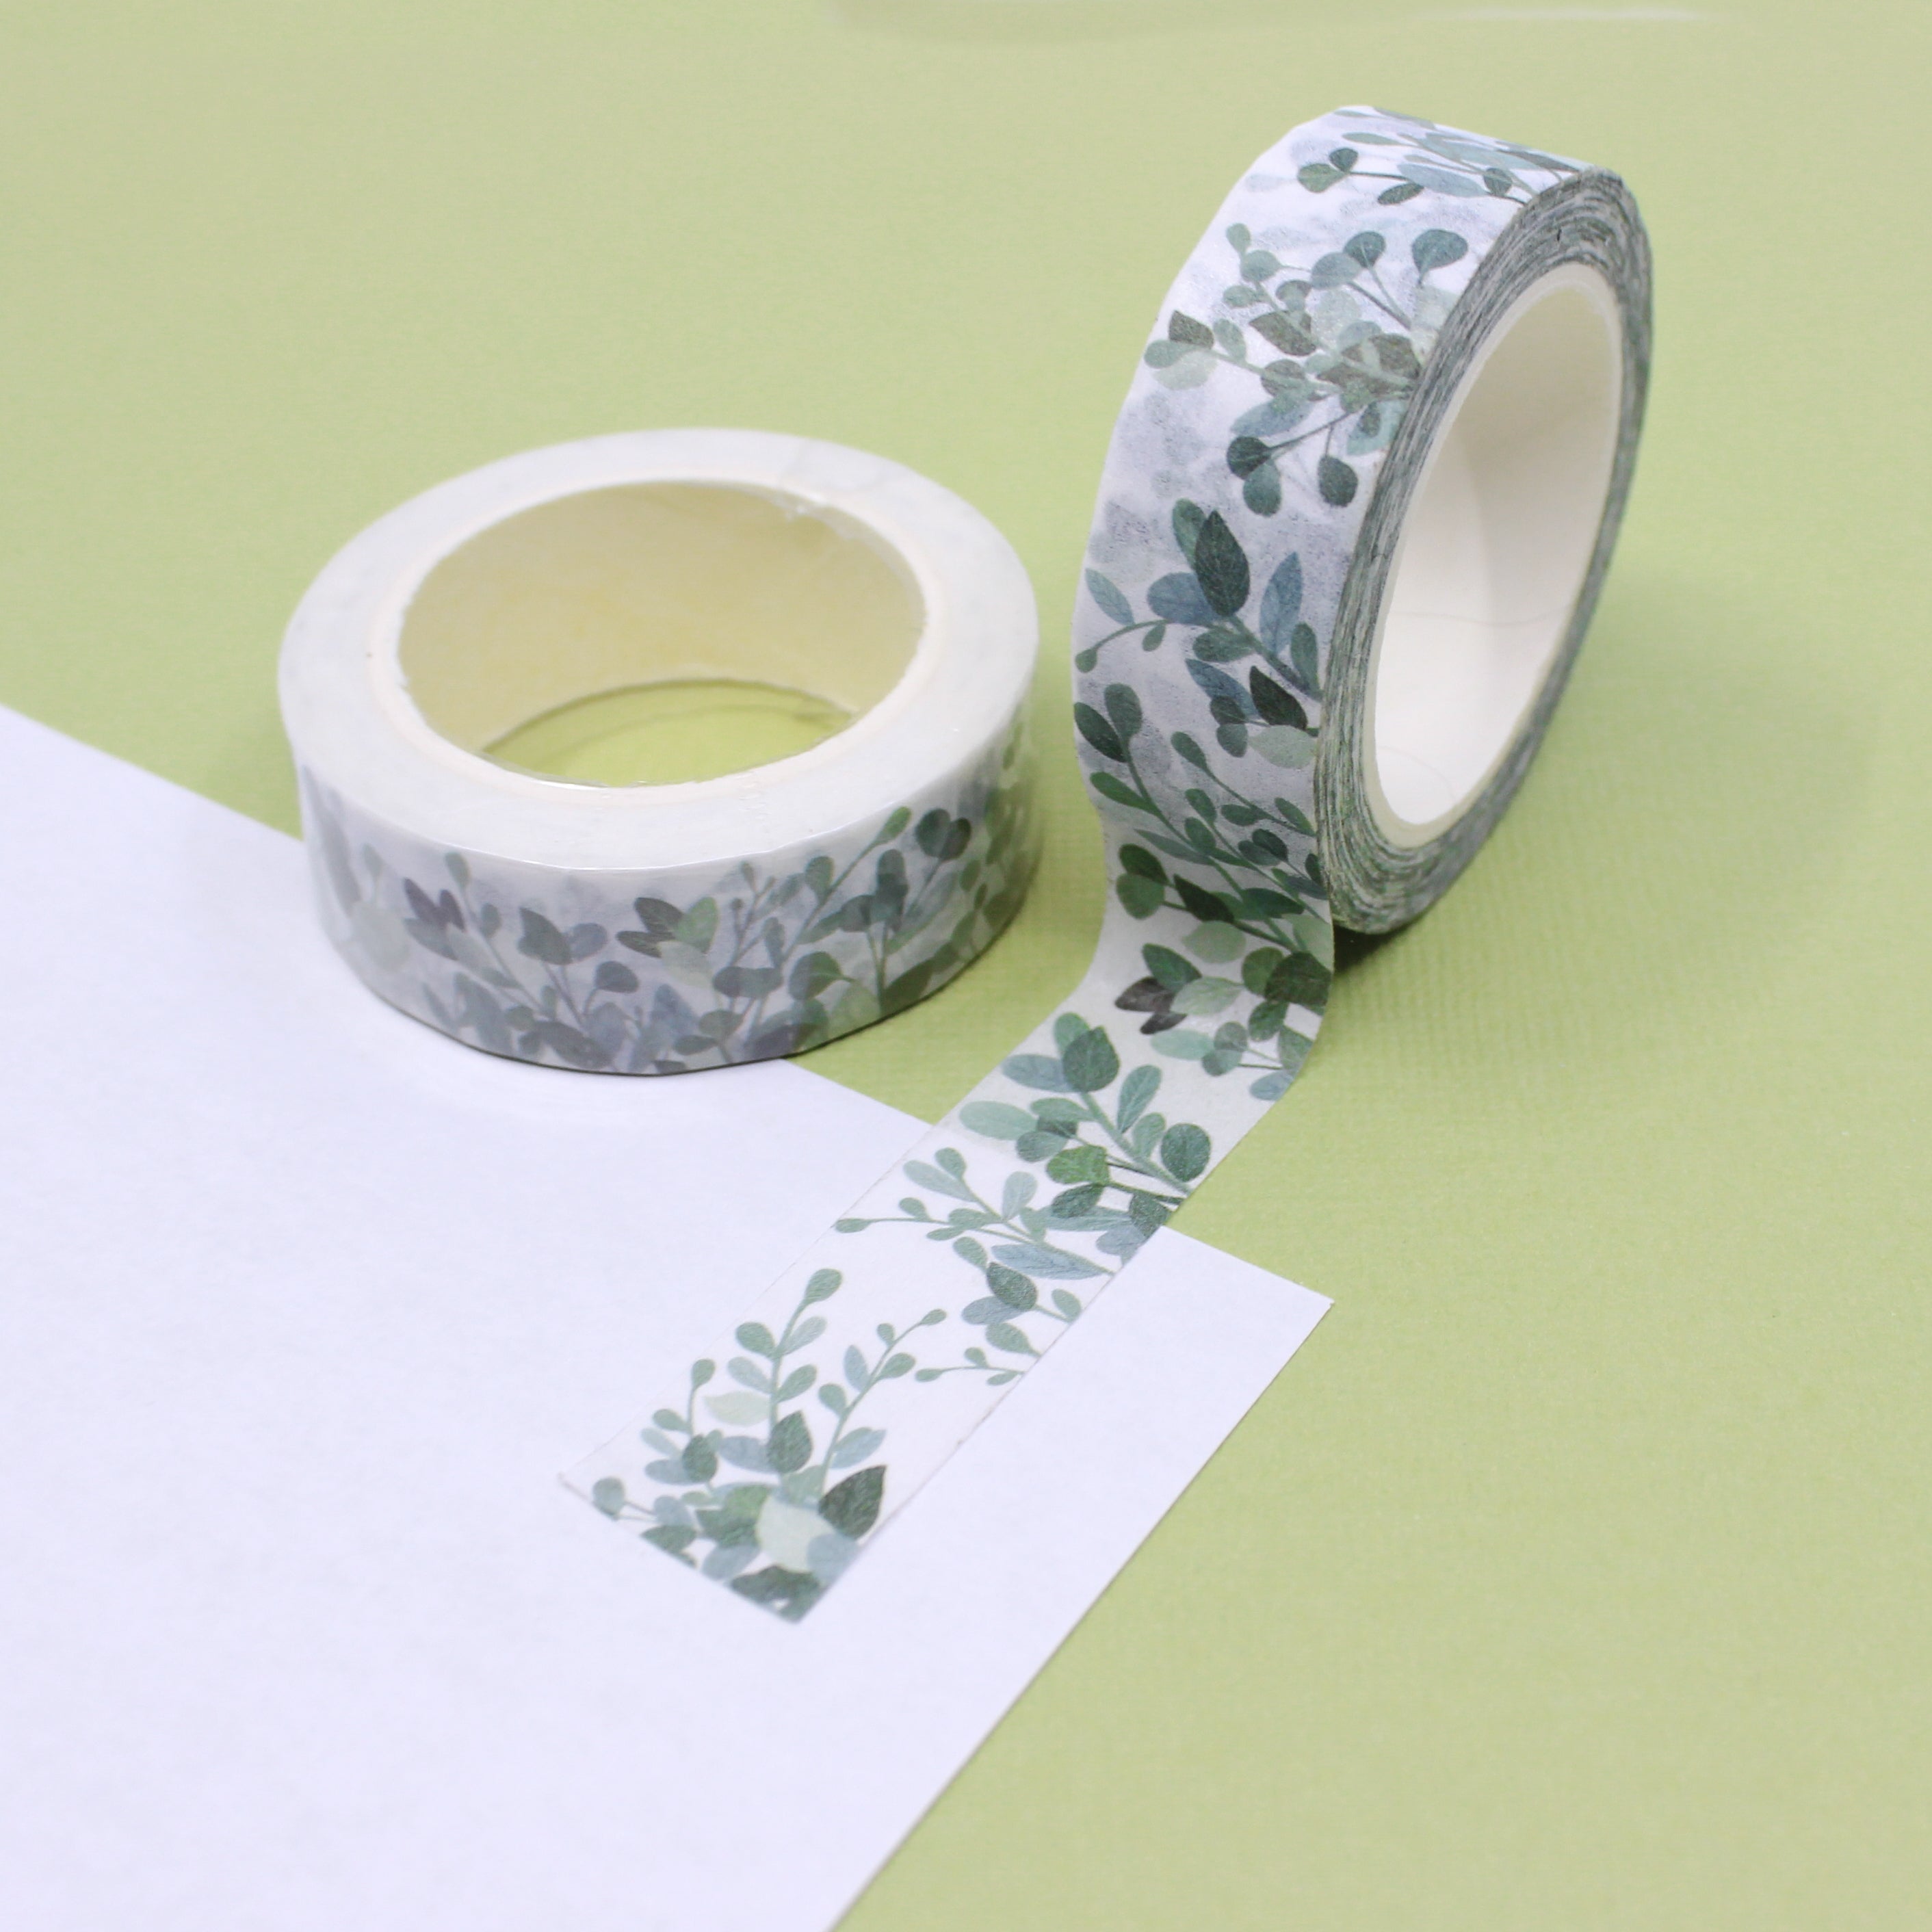 This a silver dollar eucalyptus collections pattern washi tape from BBB Supplies Craft Shop